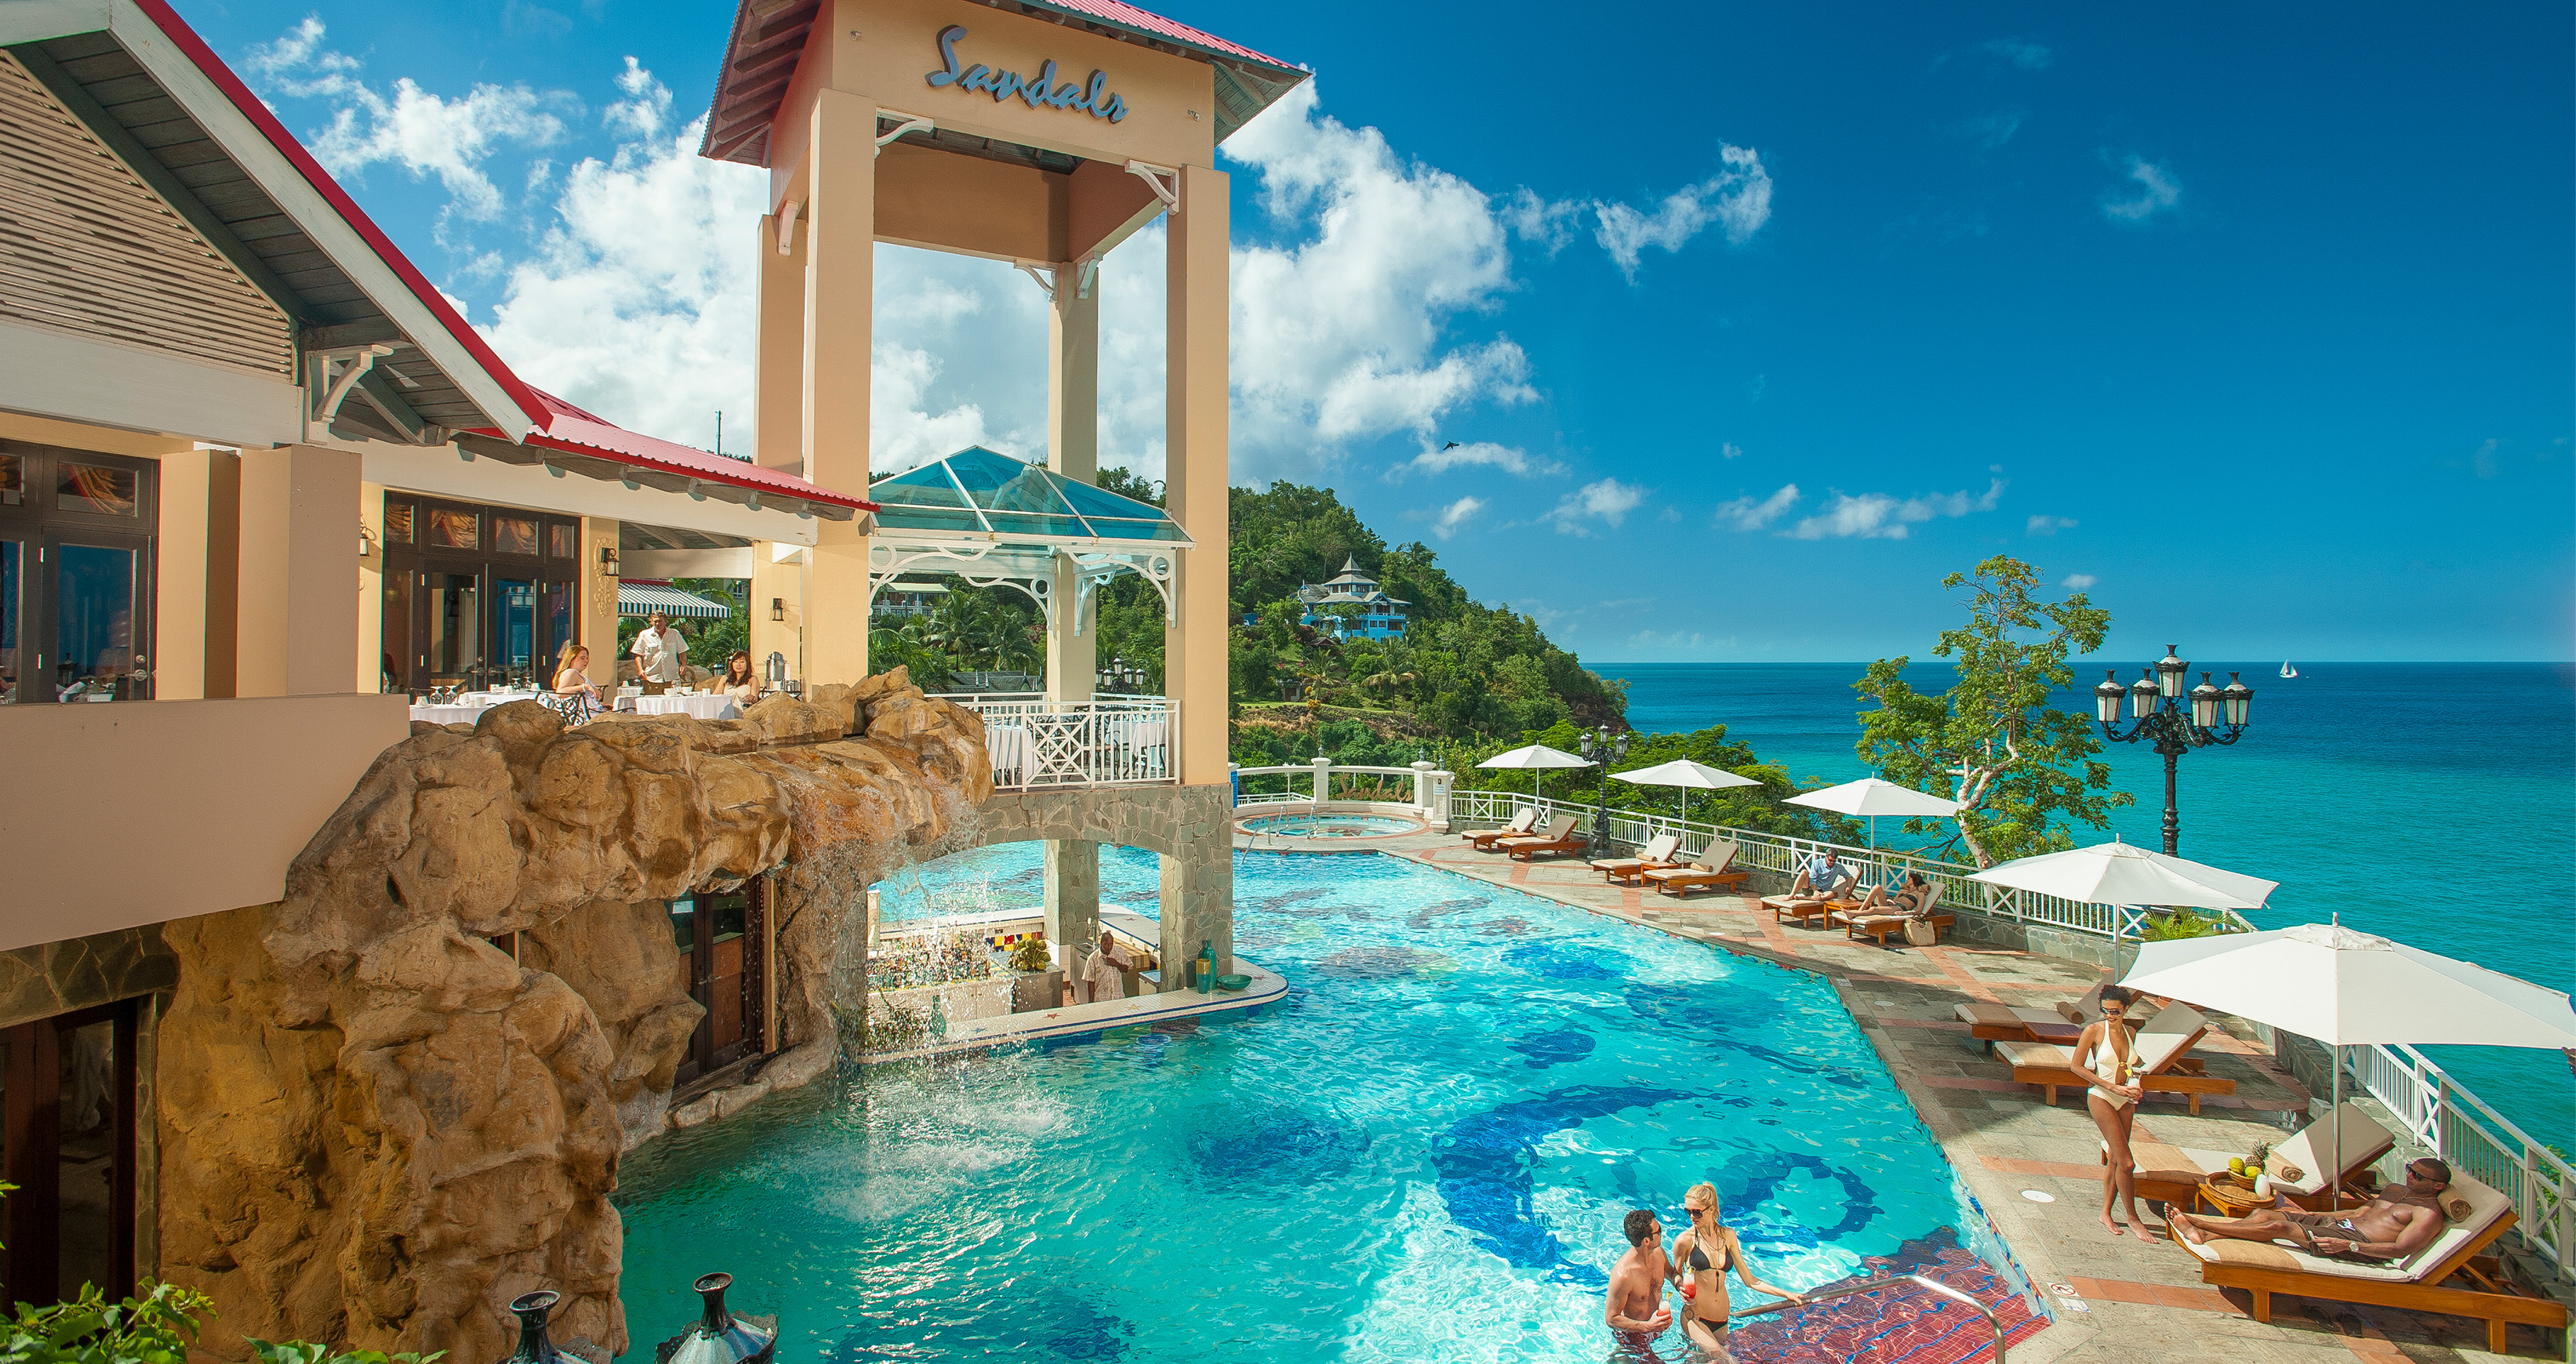 Experience Sandals Royal Caribbean: ✓ All-inclusive beach resort ✓ Private  offshore island ✓ Access to Sandals Montego Bay - Book direct for the best  price!